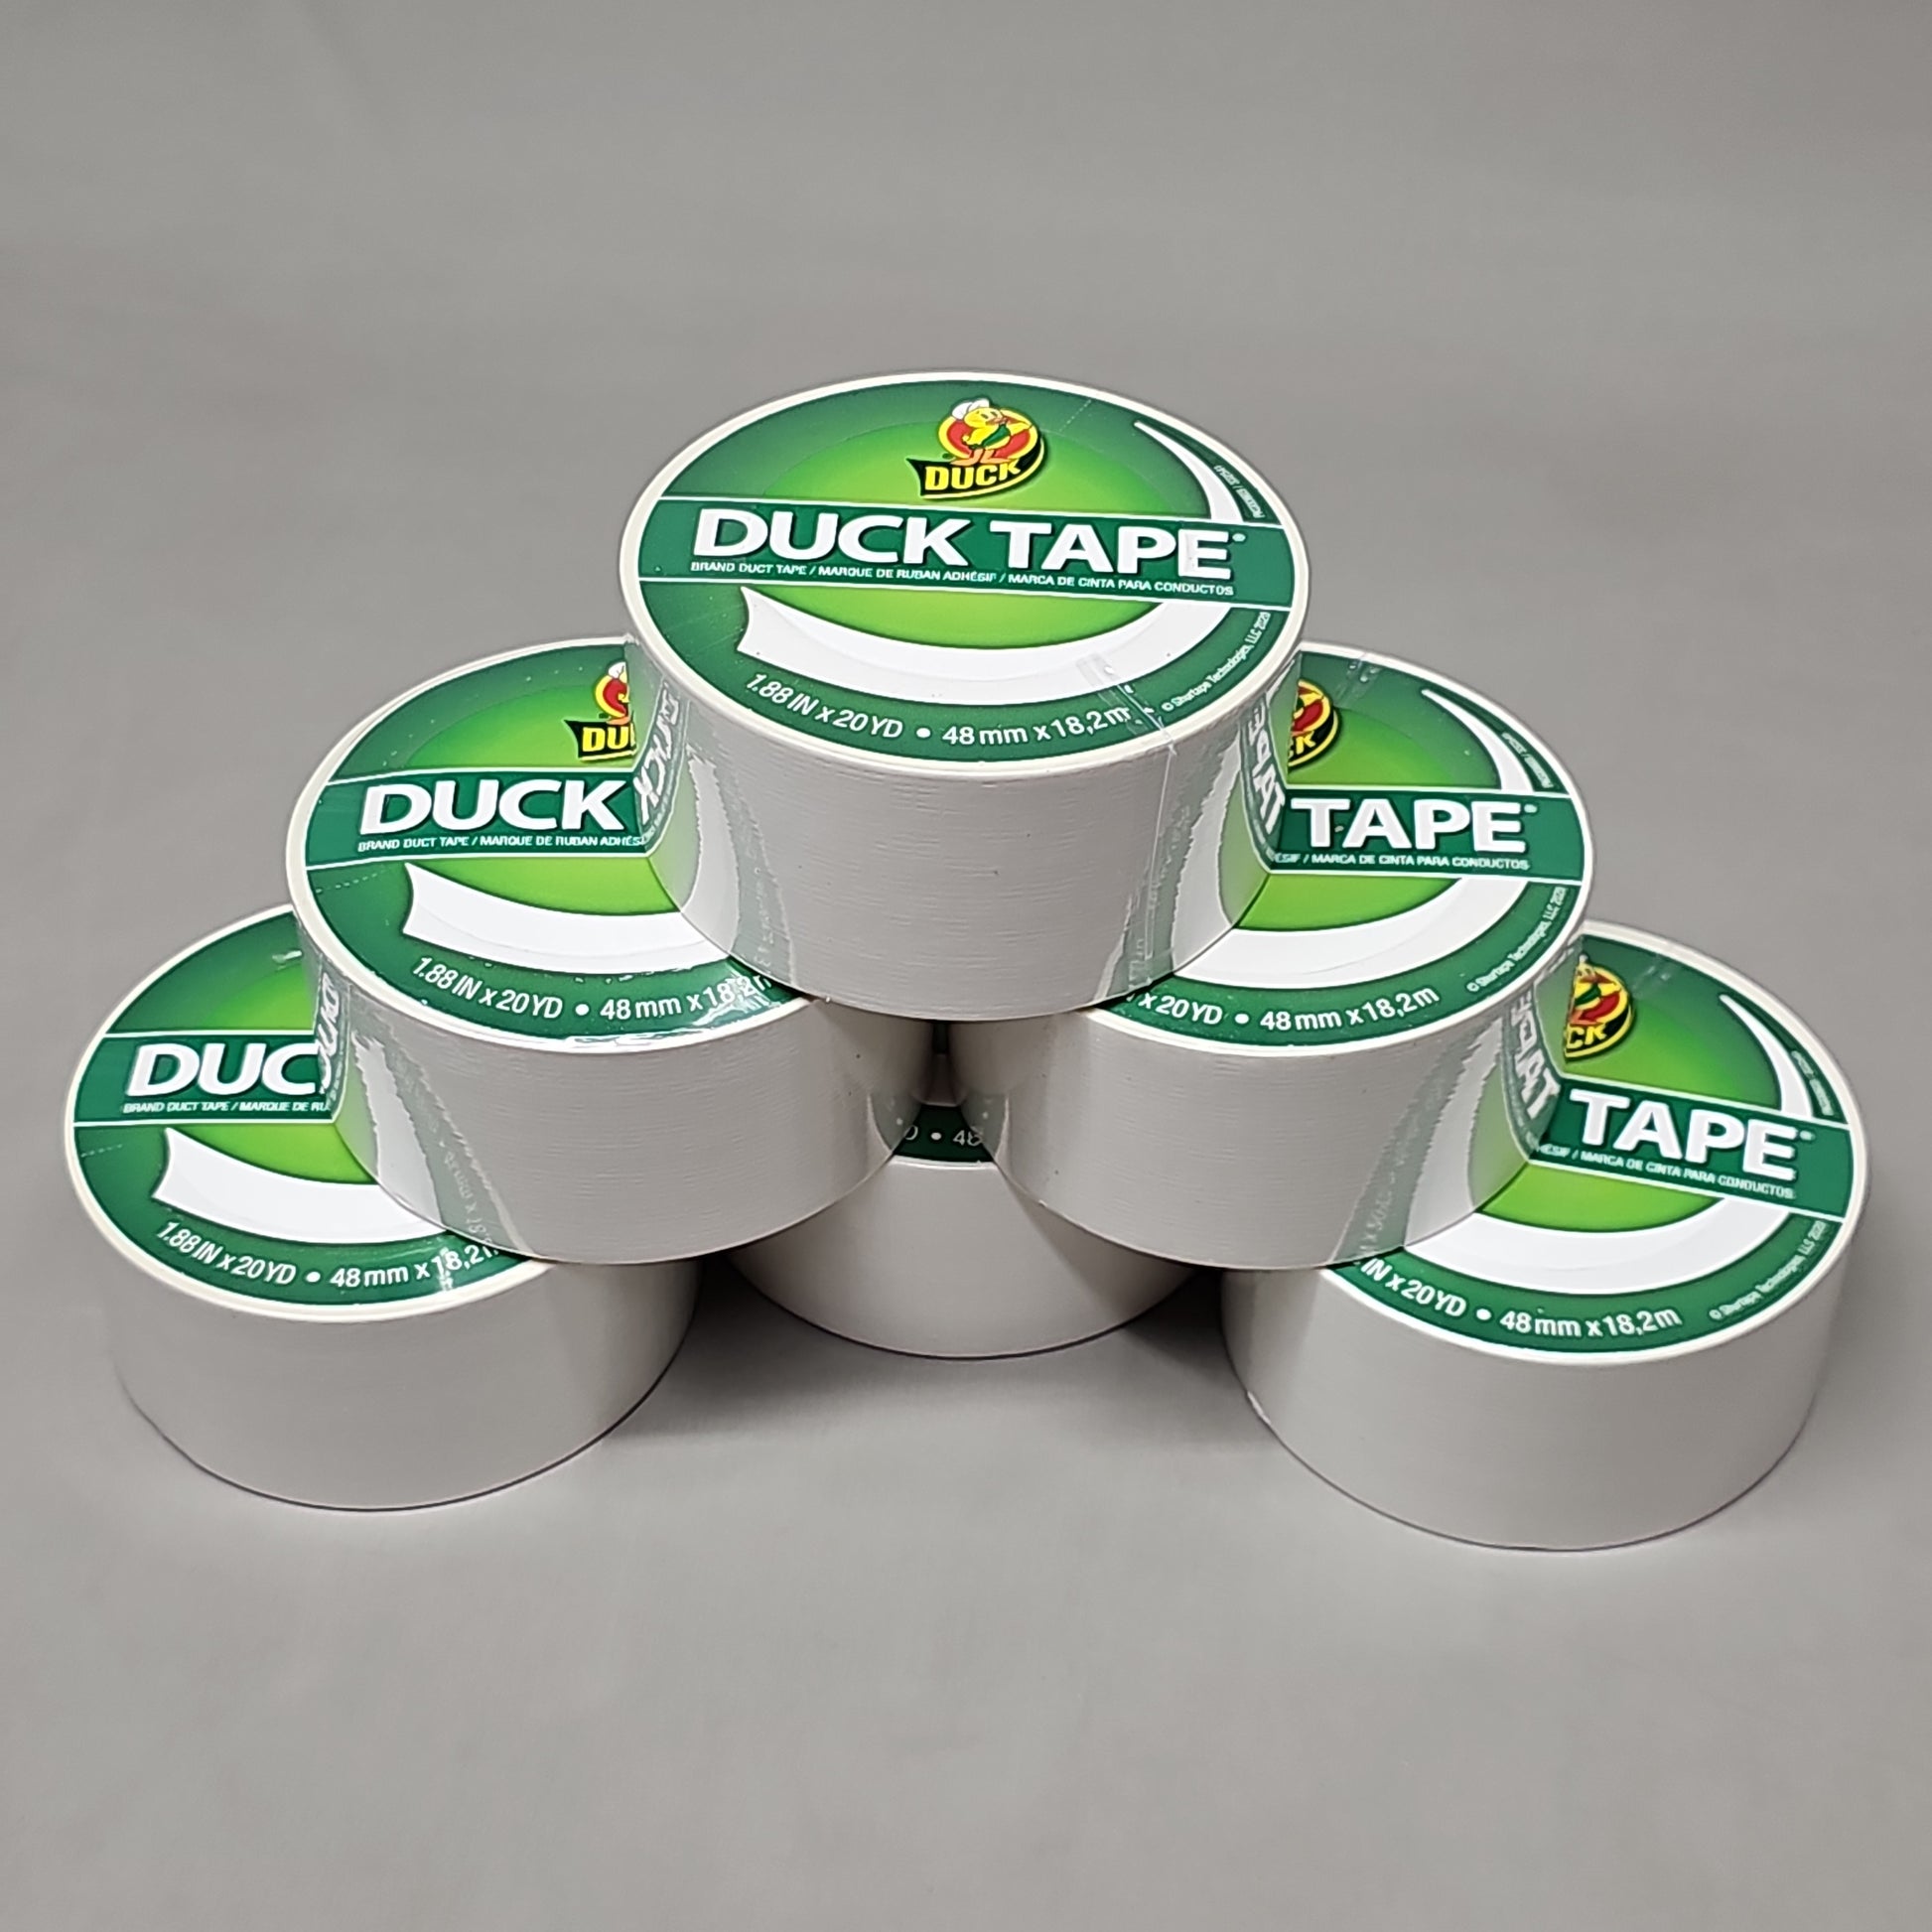 Duck Brand 1.88 in x 20 yd. White Colored Duct Tape, 6 Pack